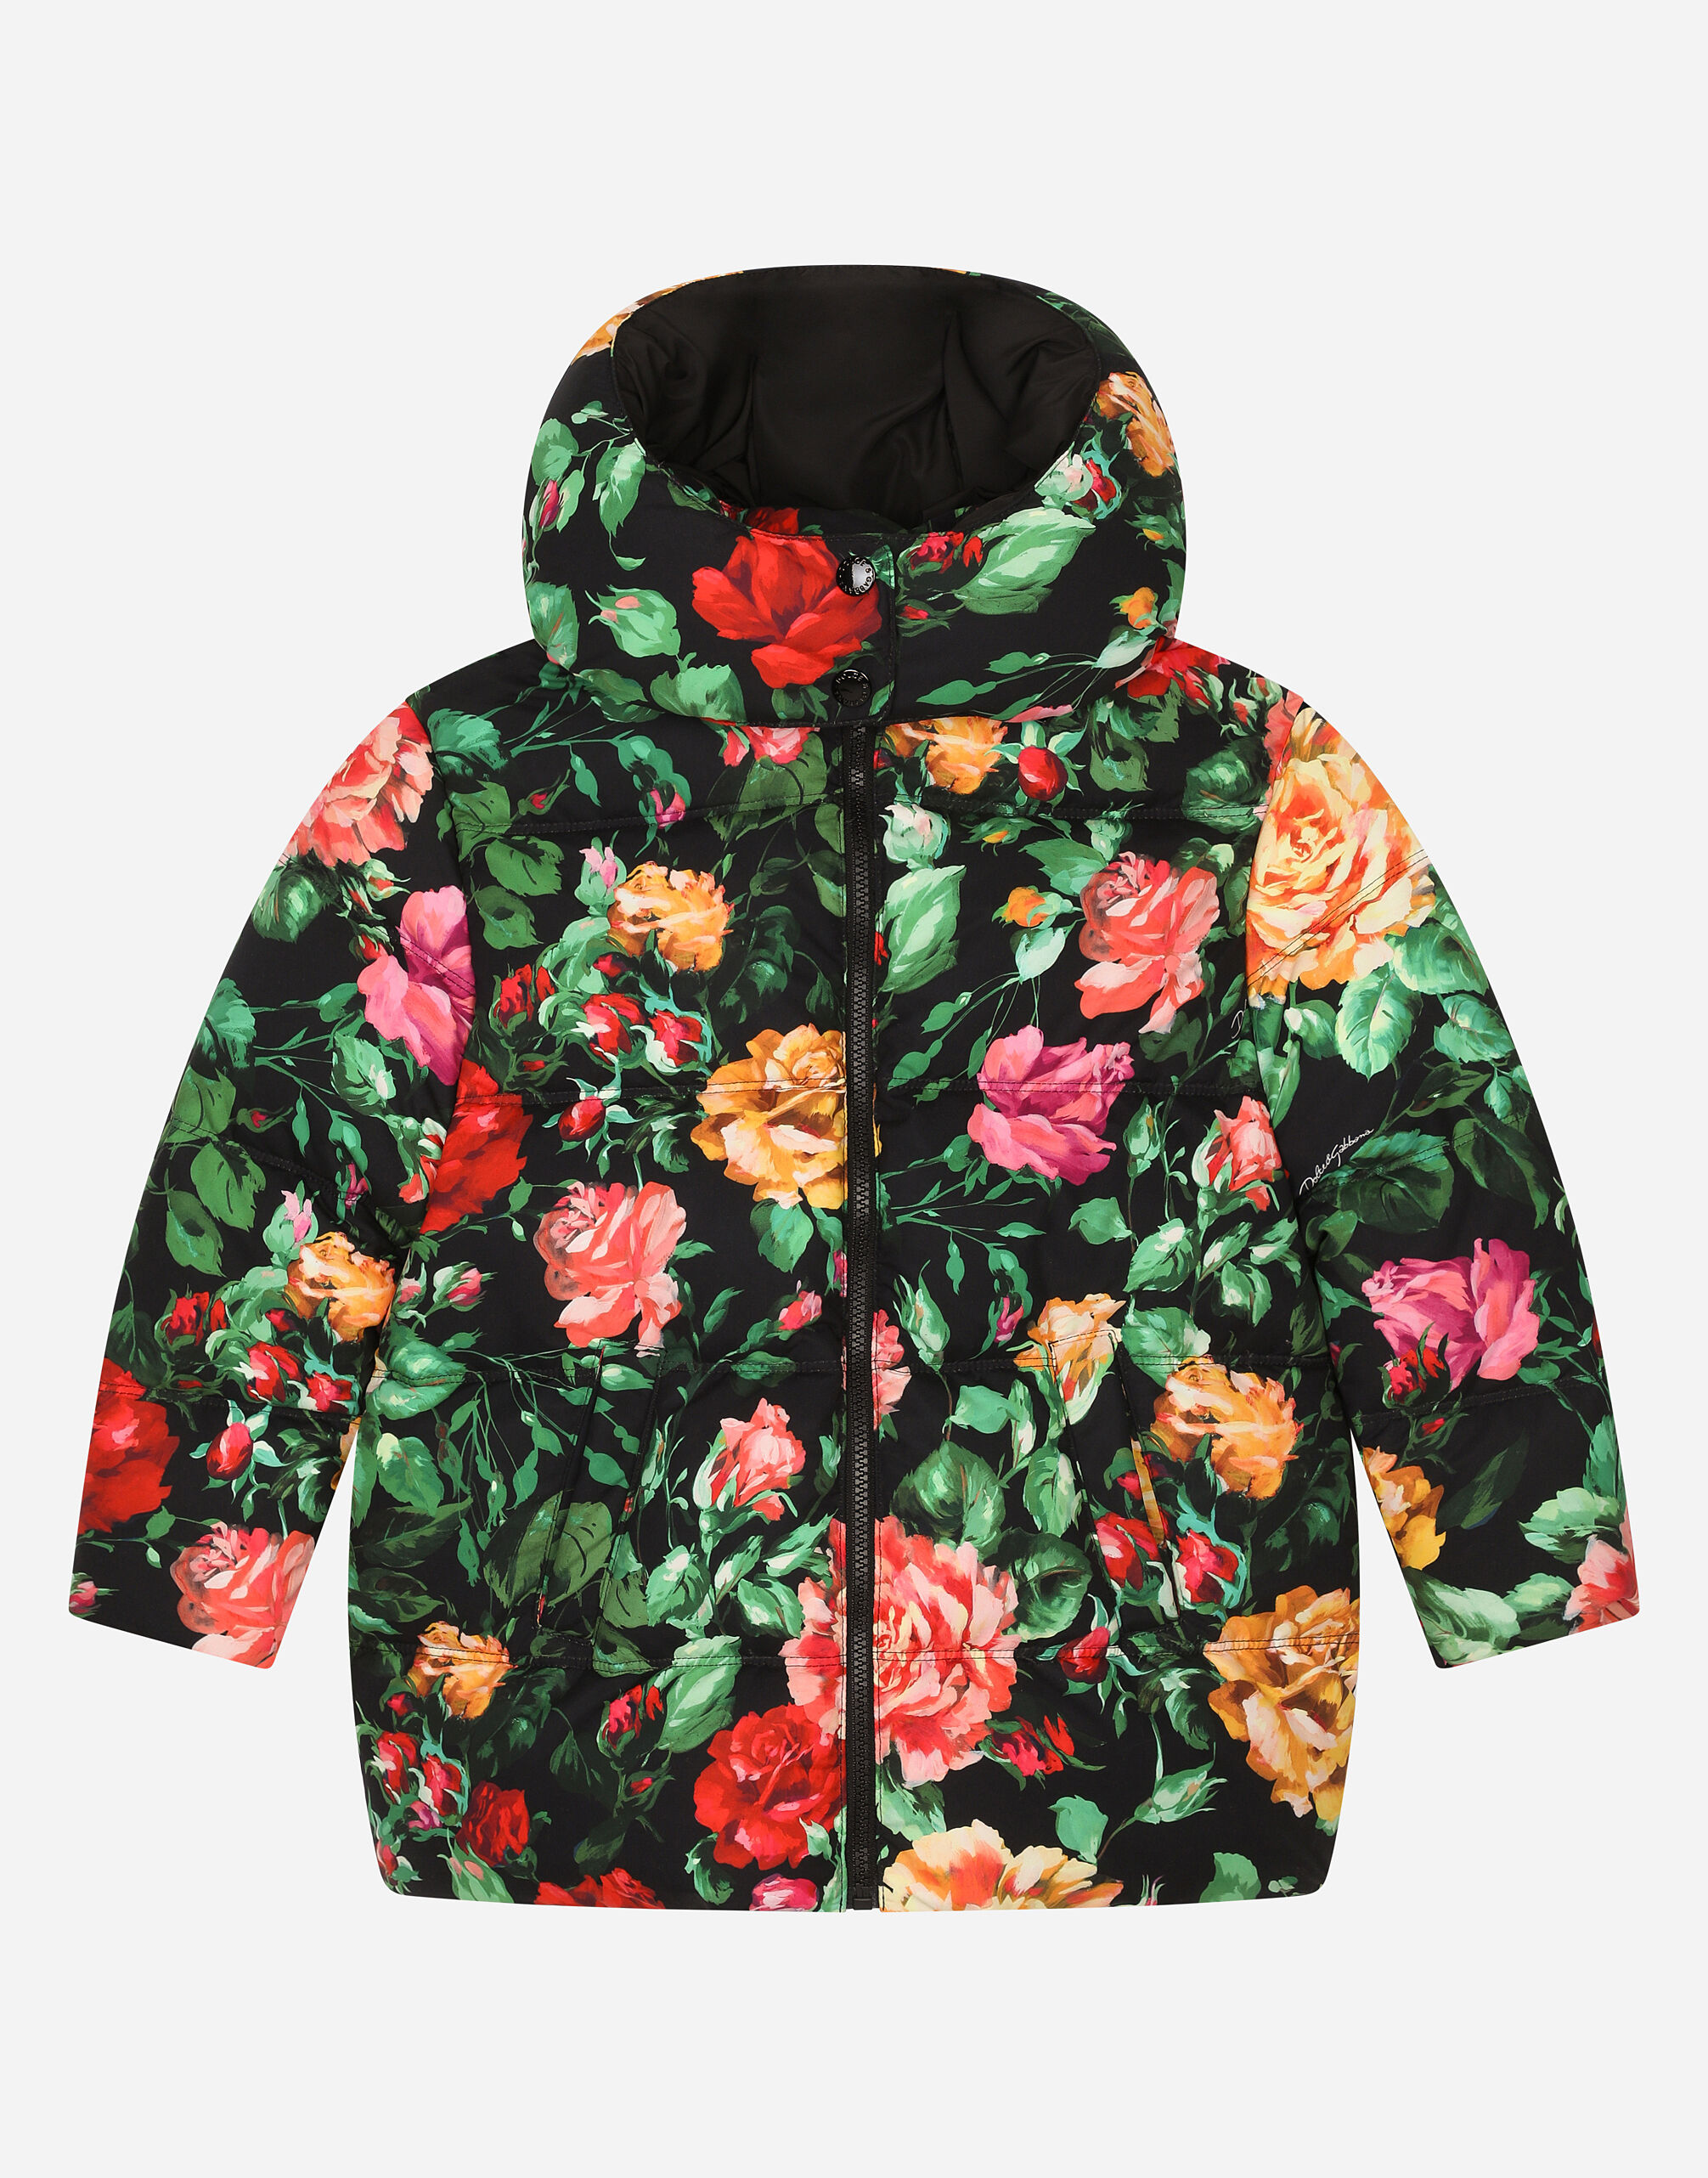 ${brand} Long nylon down jacket with rose print over a black background ${colorDescription} ${masterID}